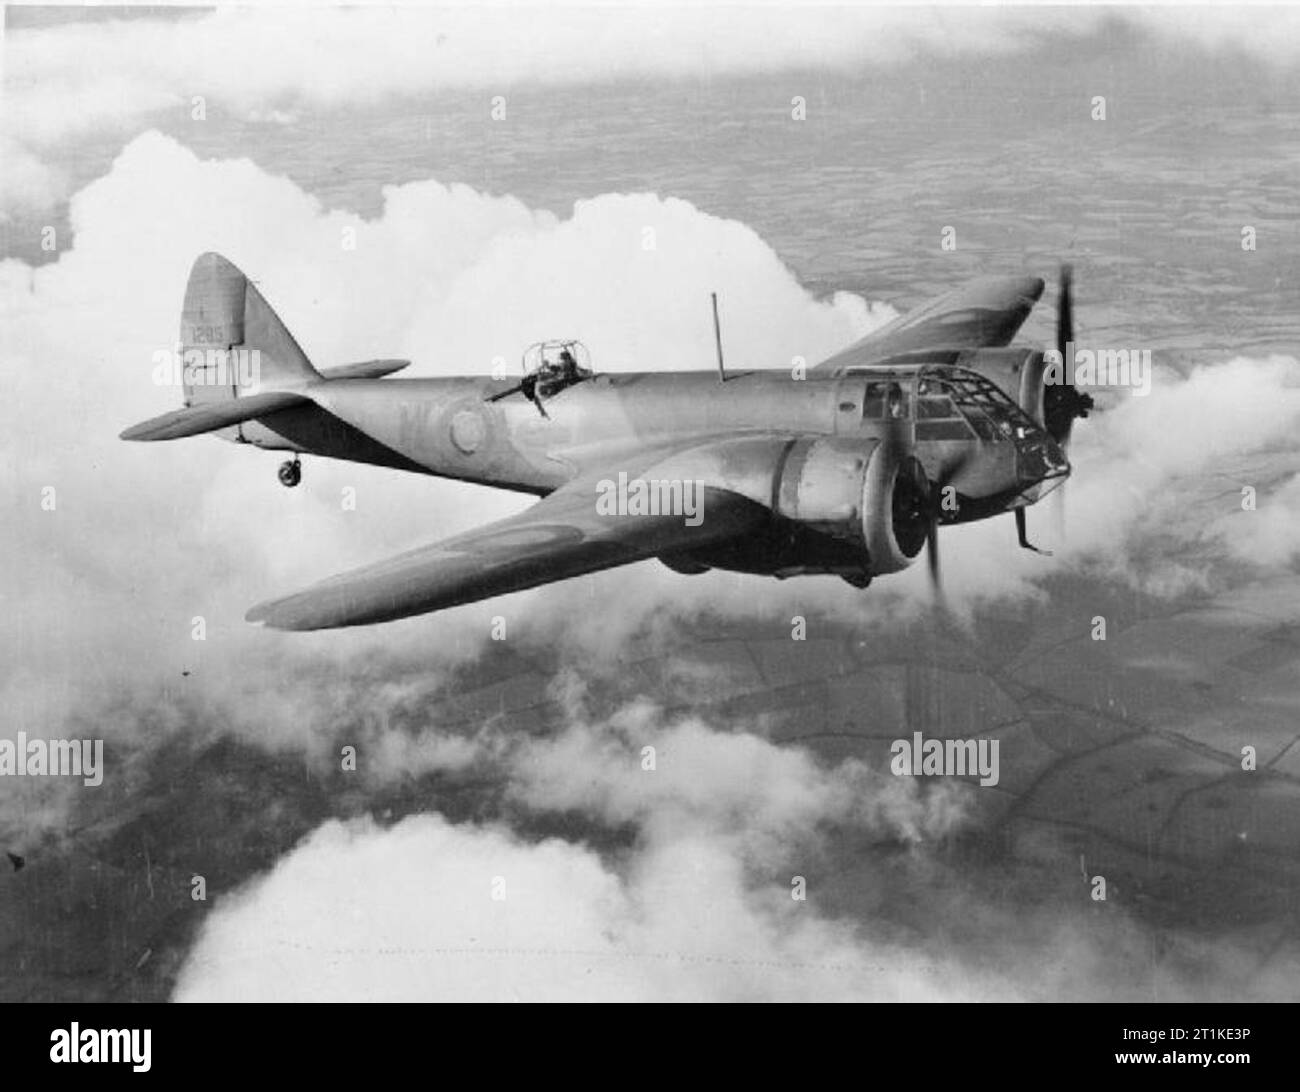 Aircraft Ofthe Royal Air Force, 1939-1941- Bristol Type 142m Blenheim I. Bristol Blenheim Mark I, L1295 in flight above the clouds. This aircraft commenced service in August 1938 with No. 107 Squadron RAF, followed by No. 600 Squadron RAF, the Royal Aircraft Establishment, No. 54 Operational Training Unit, RAF Cranwell, No. 3 Radio School, and finally No. 12 (Pilots) Advanced Flying Unit, with whom she was damaged beyond repair after crash-landing at Harlaxton on 29 July 1943. For reasons not known, the fuselage roundel and unit code were painted out at the time this photograph was taken. Stock Photo